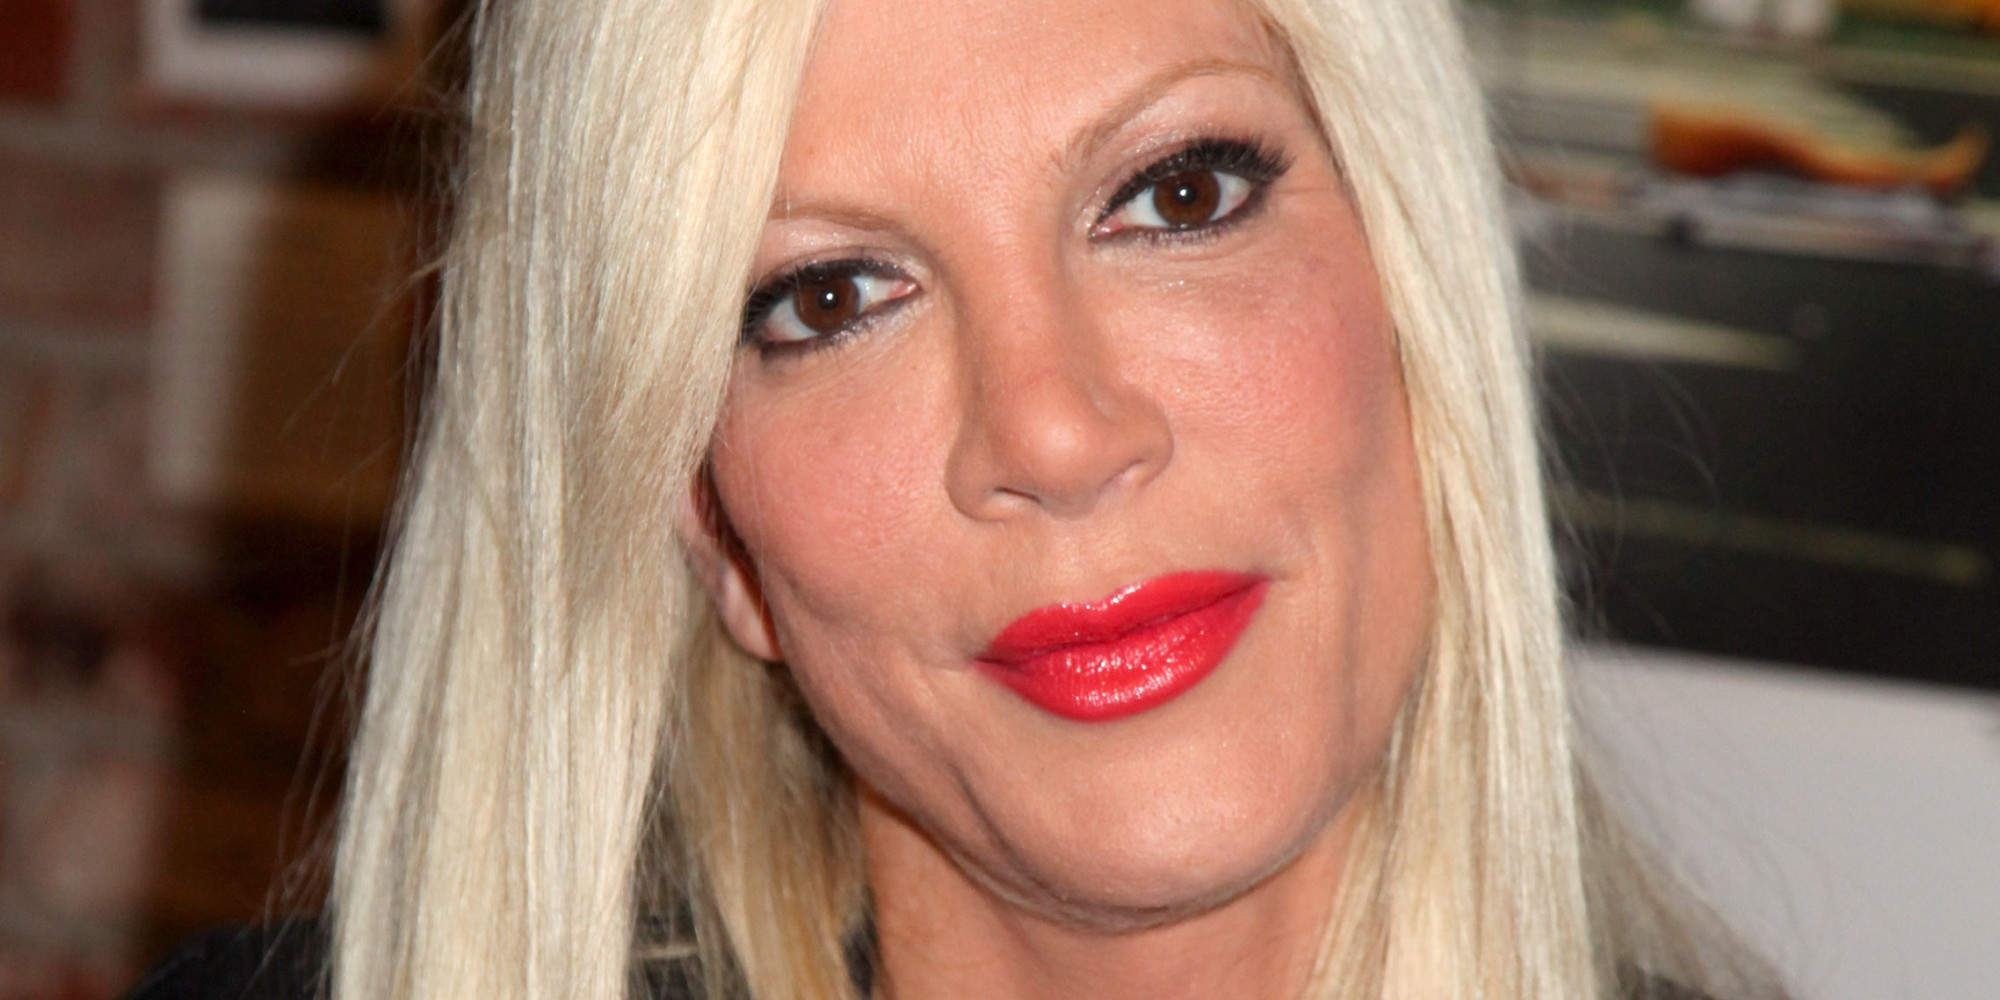 Tori Spelling Hospitalized Amid Marriage Woes